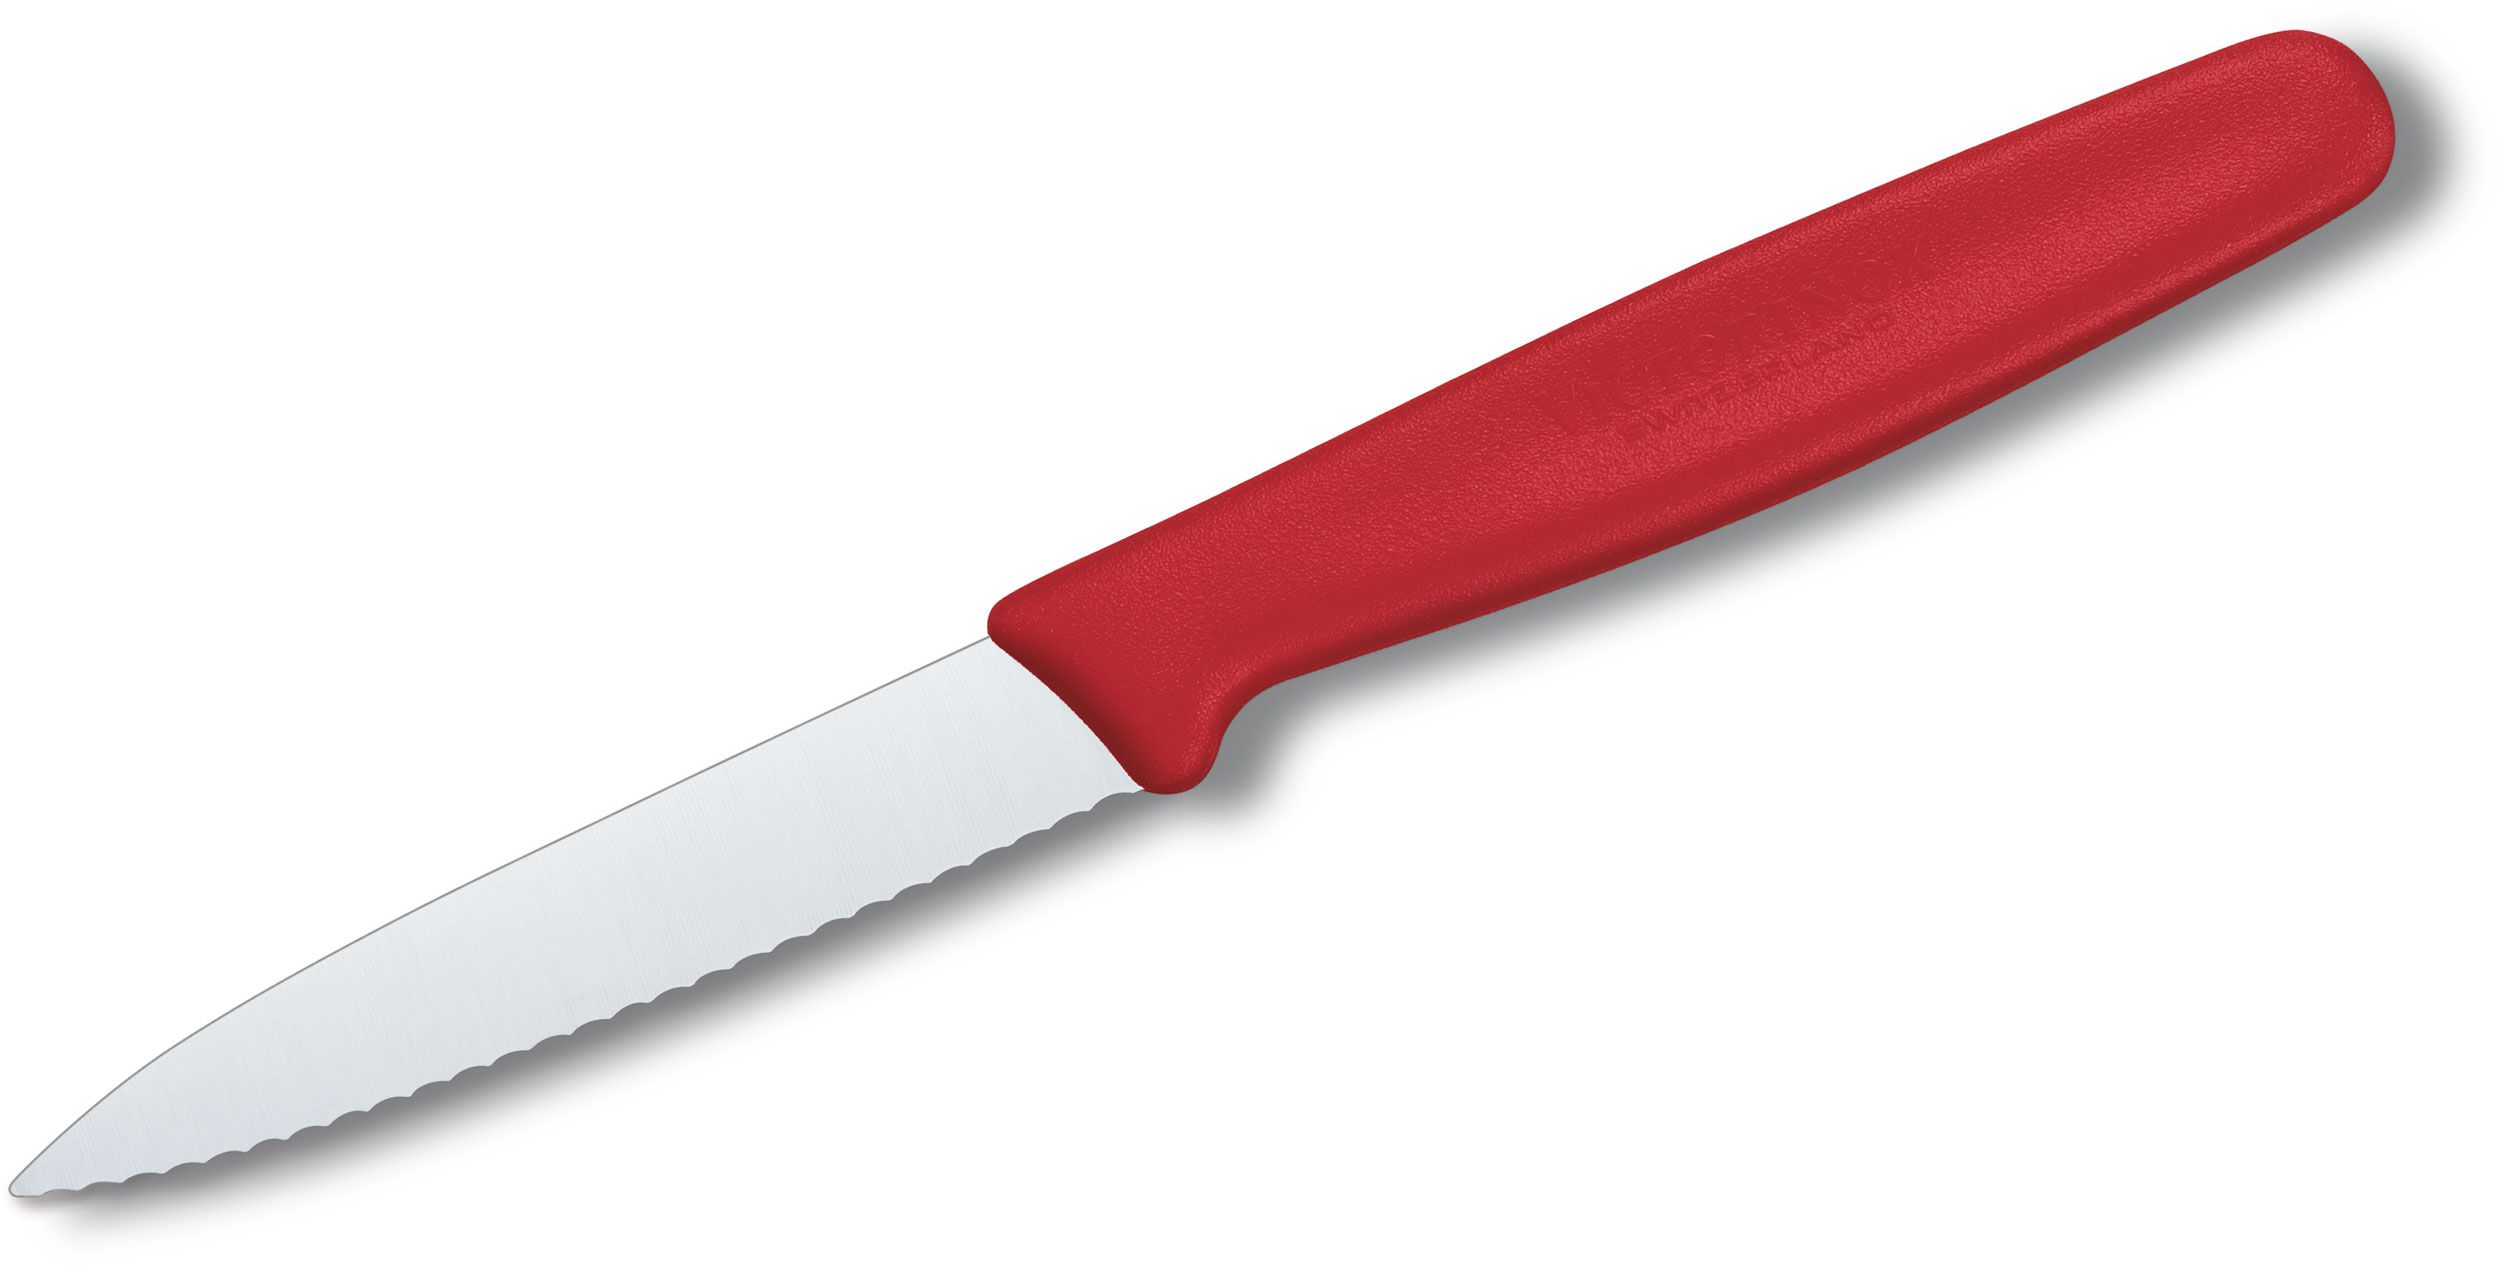 Victorinox Red 3 1/4 Sheep's Foot Paring Knife - Red Hill Cutlery